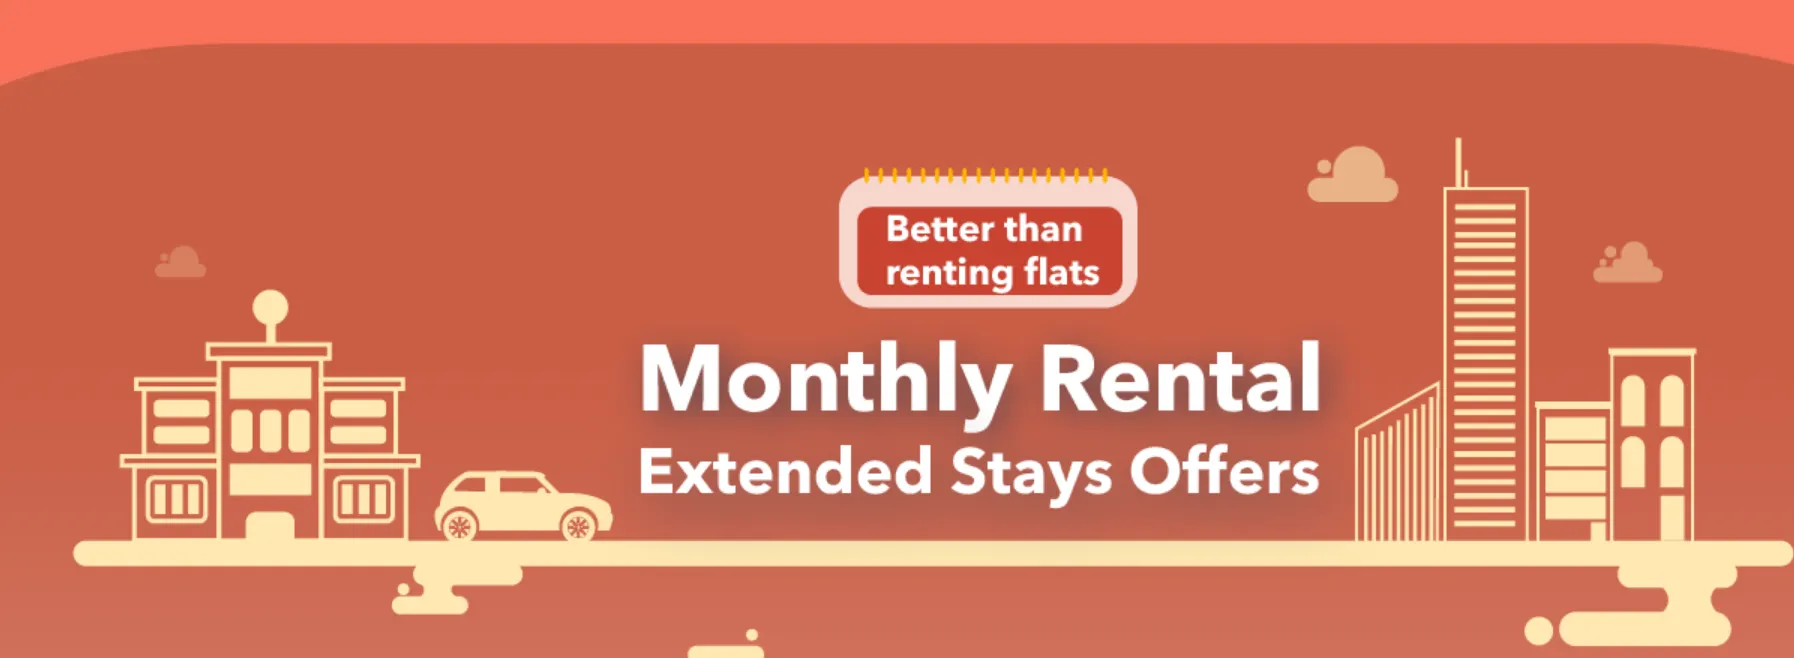 Extended Stays Offers